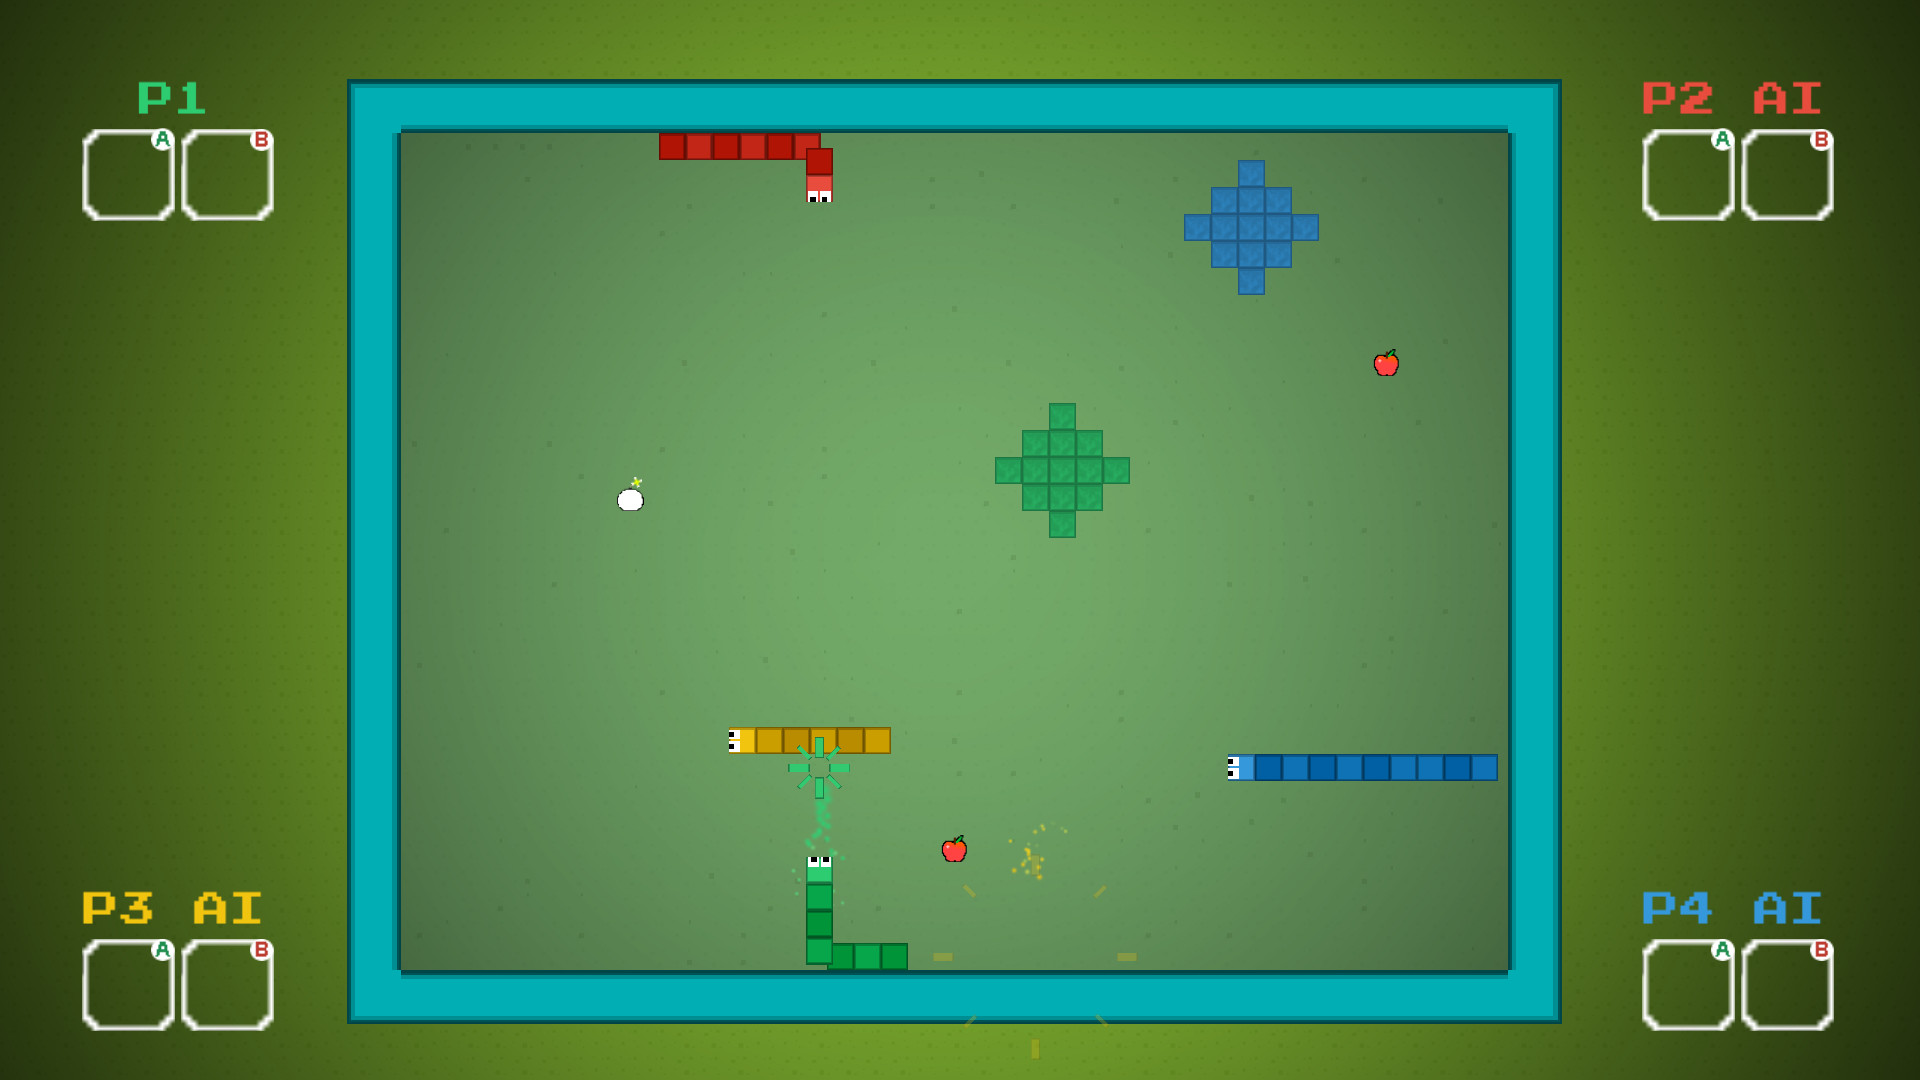 AI Snake Game: Classic Arcade - Apps on Google Play